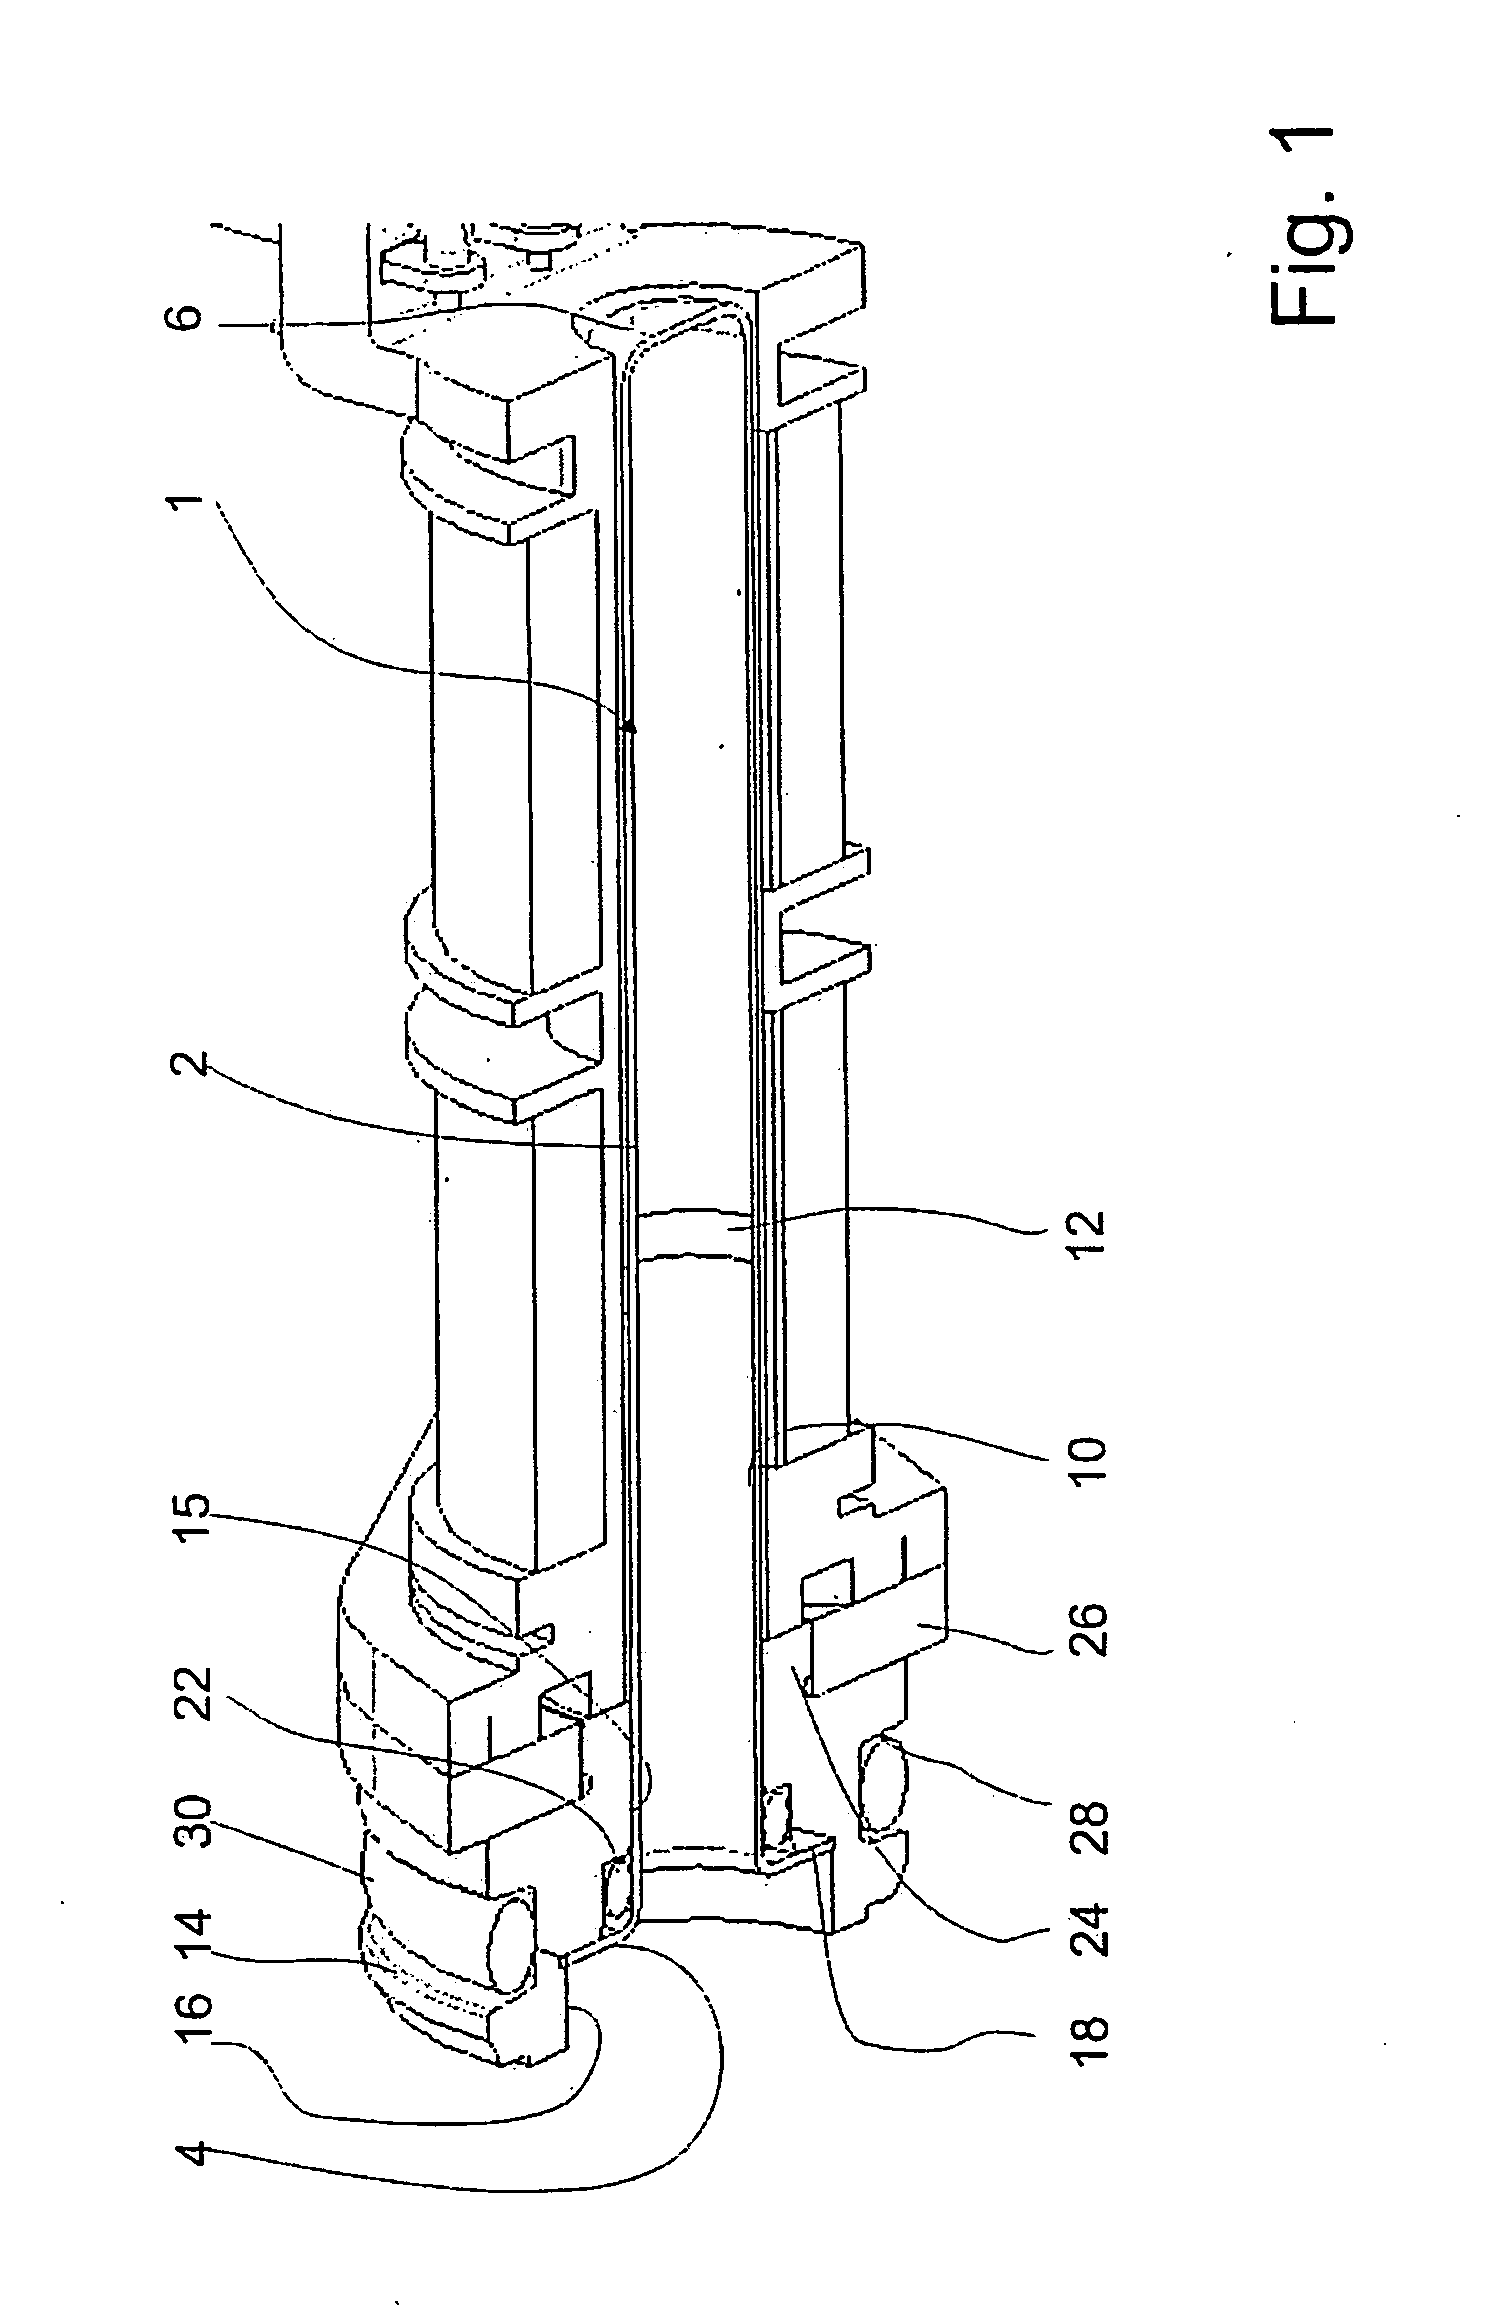 Pressure tube for a position measuring system